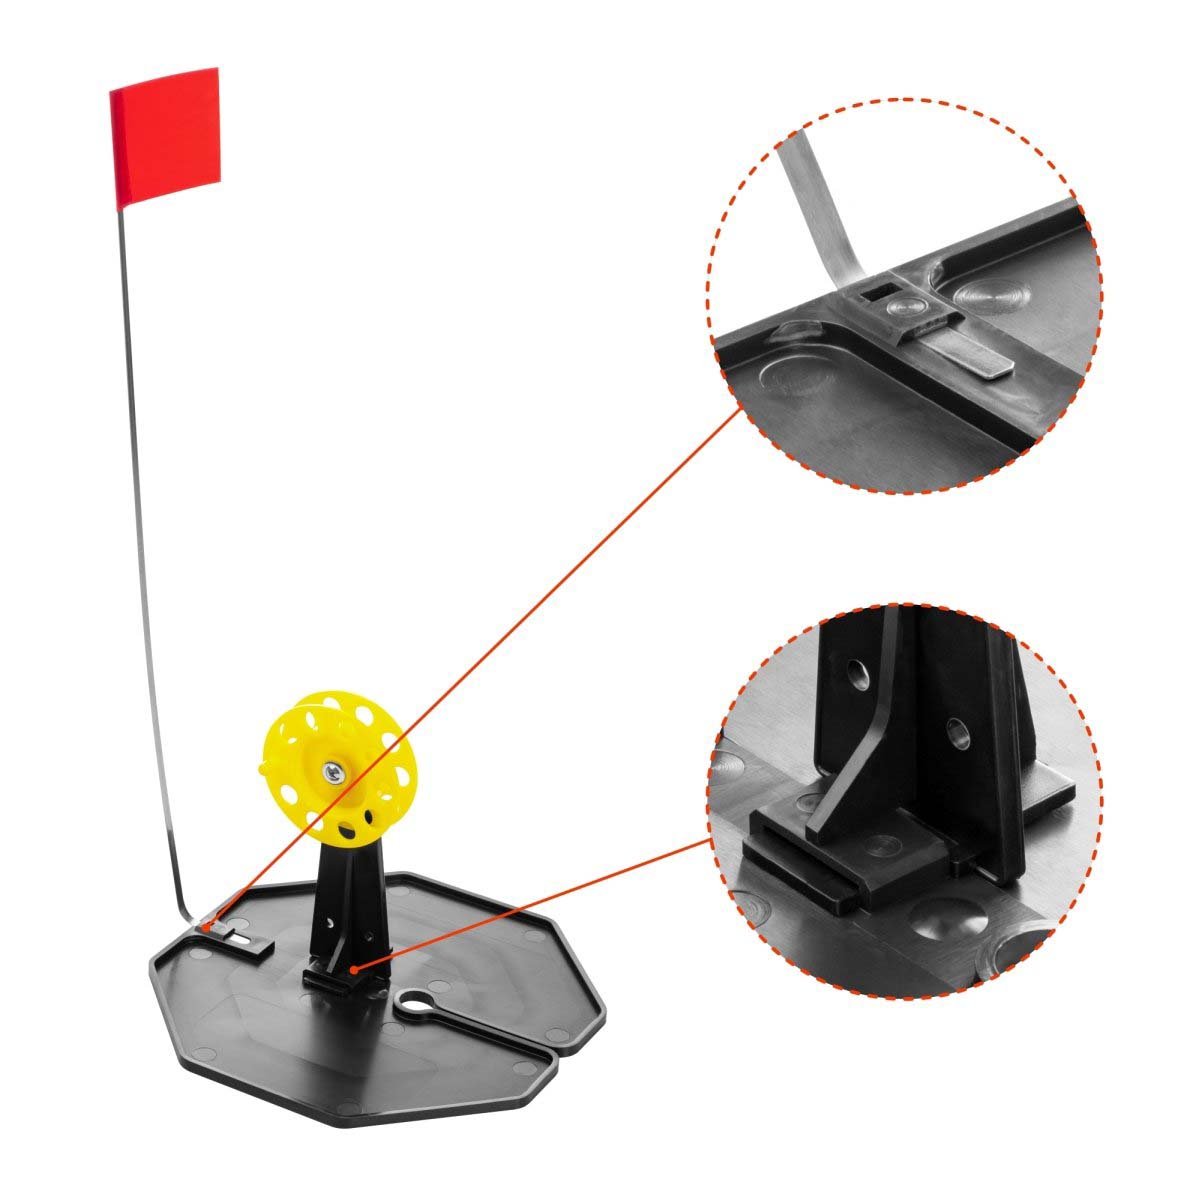 The flag shaft is reliably fixed at the base of Tip-up Pop-Up Integrated Hole-Cover Easy to Clip